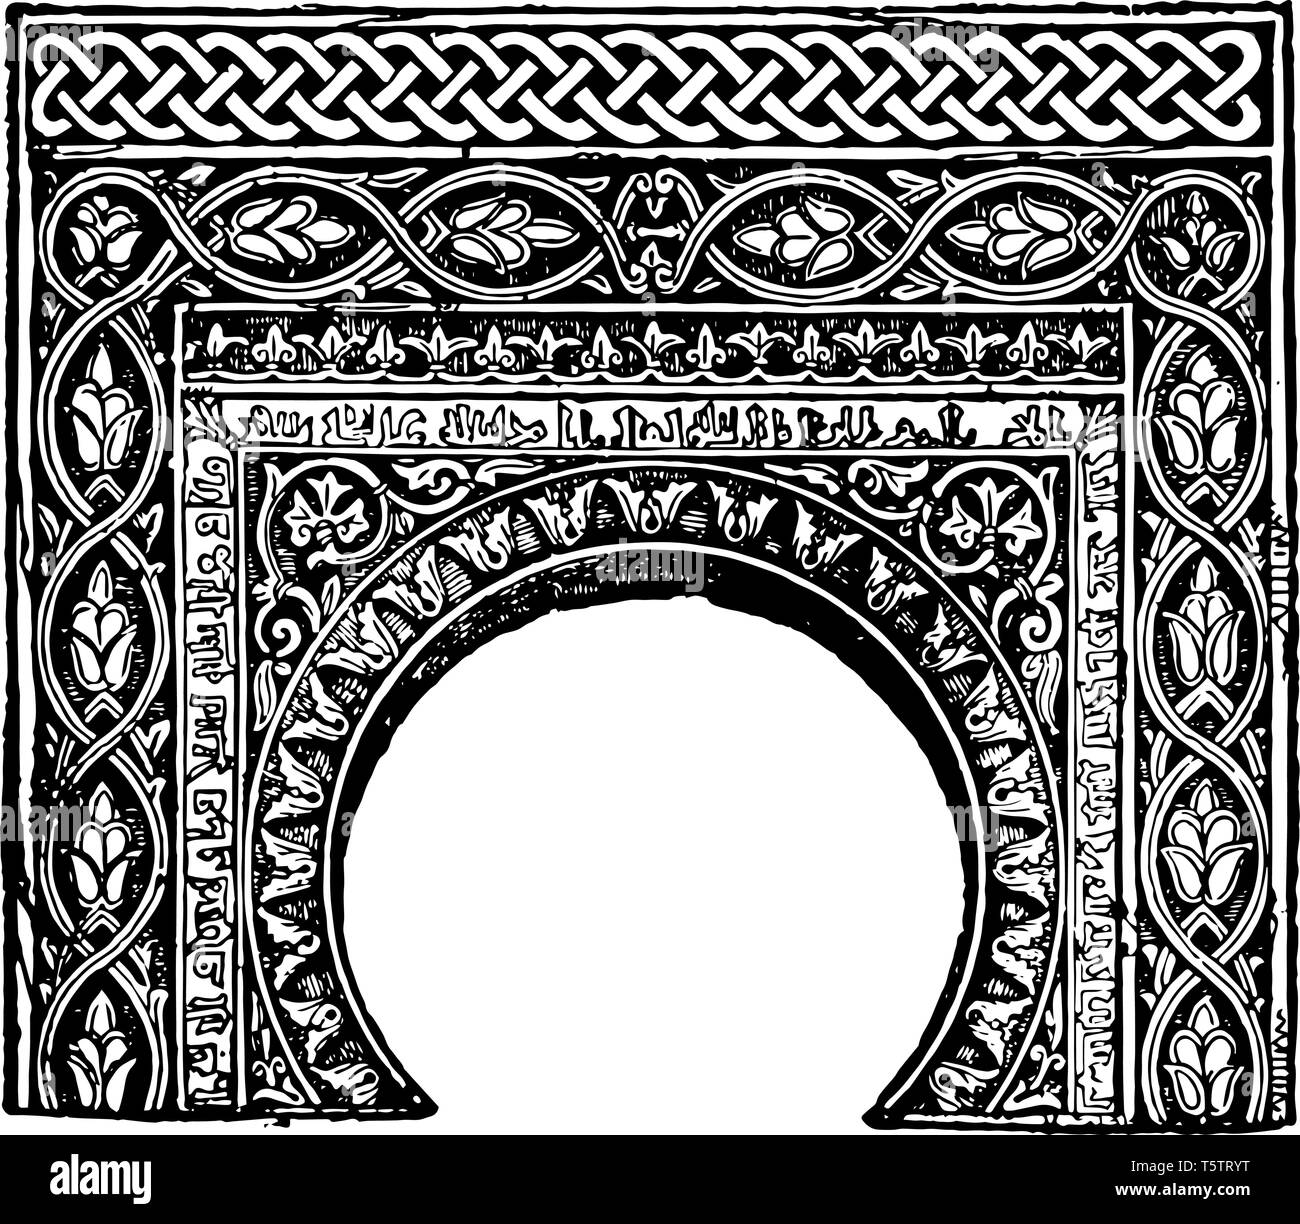 Arabesque Archway a style of ornamentation represented men animals the latter consisting of mythic as well as actual forms mathematical figures vintag Stock Vector